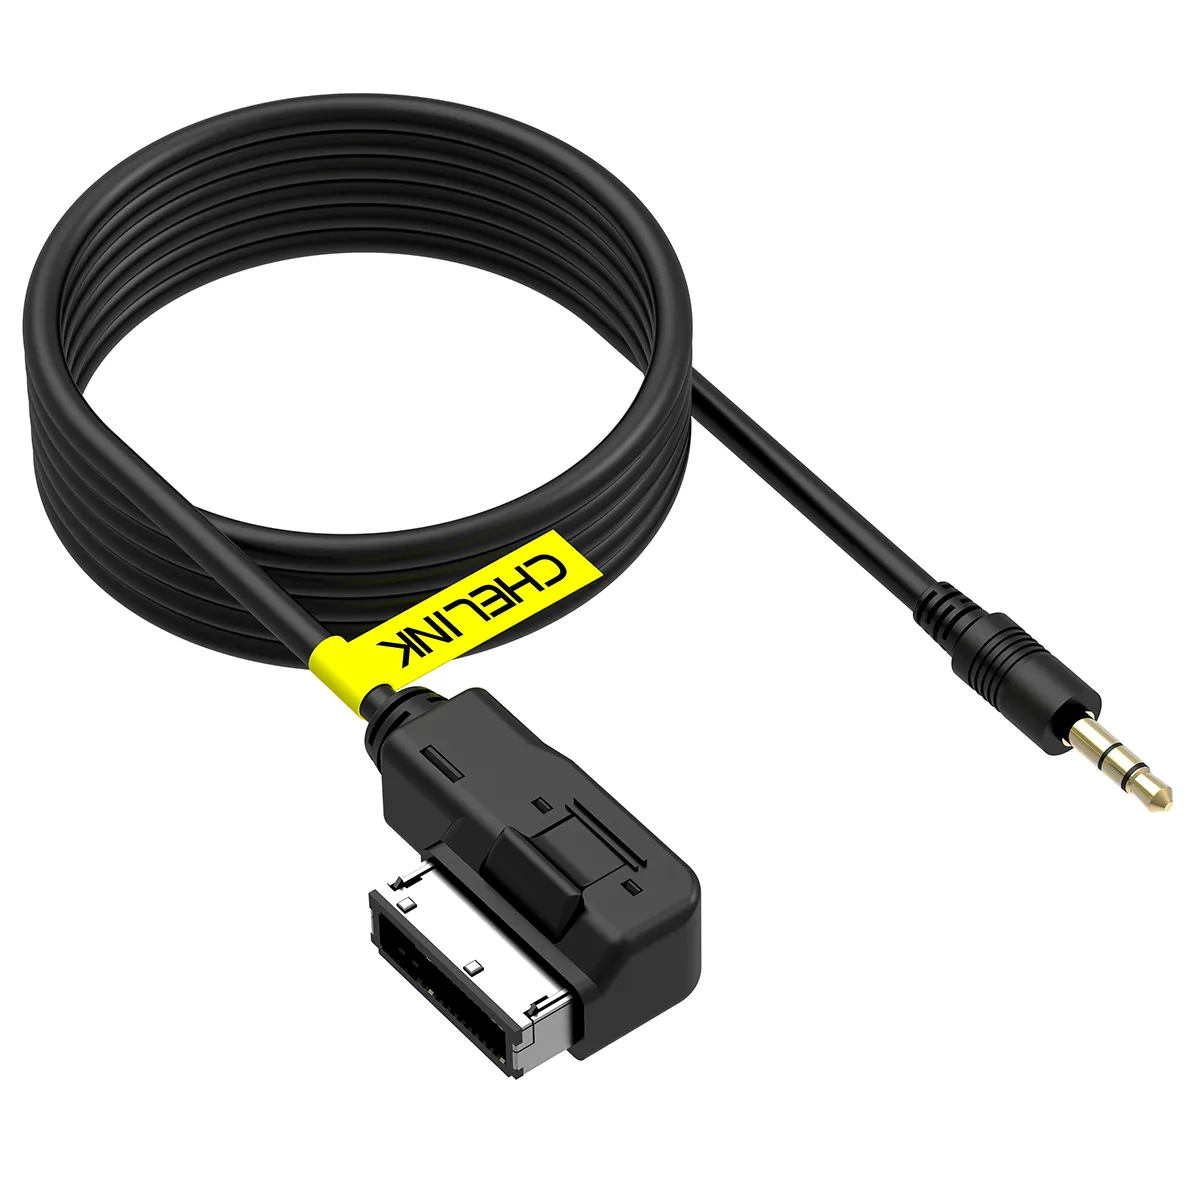 AMI MMI 3.5mm Jack Music Interface Audio AUX MP3 Adapter Cable For AUDI VW